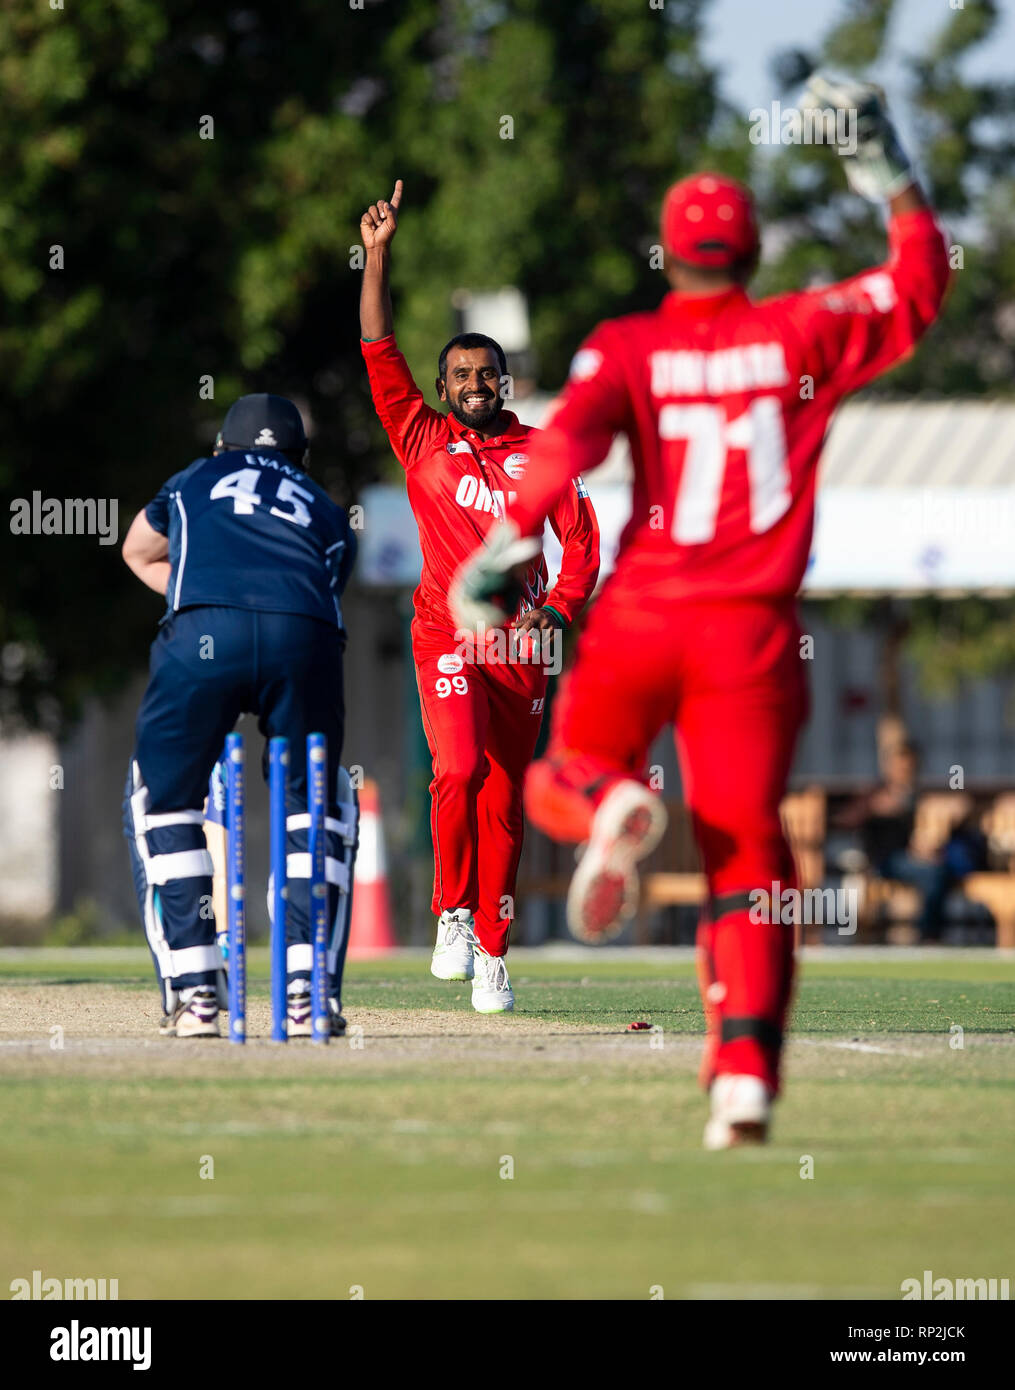 Muscat, Oman. 20th Feb, 2019. Pic shows: Oman's Muhammad Nadeem celebrates tasing the wicket of Scotland's Alasdair Evans for 10 runs as Oman comprehensively beat Scotland by 93 runs to tie the 3 match 50 over series. Credit: Ian Jacobs/Alamy Live News Stock Photo